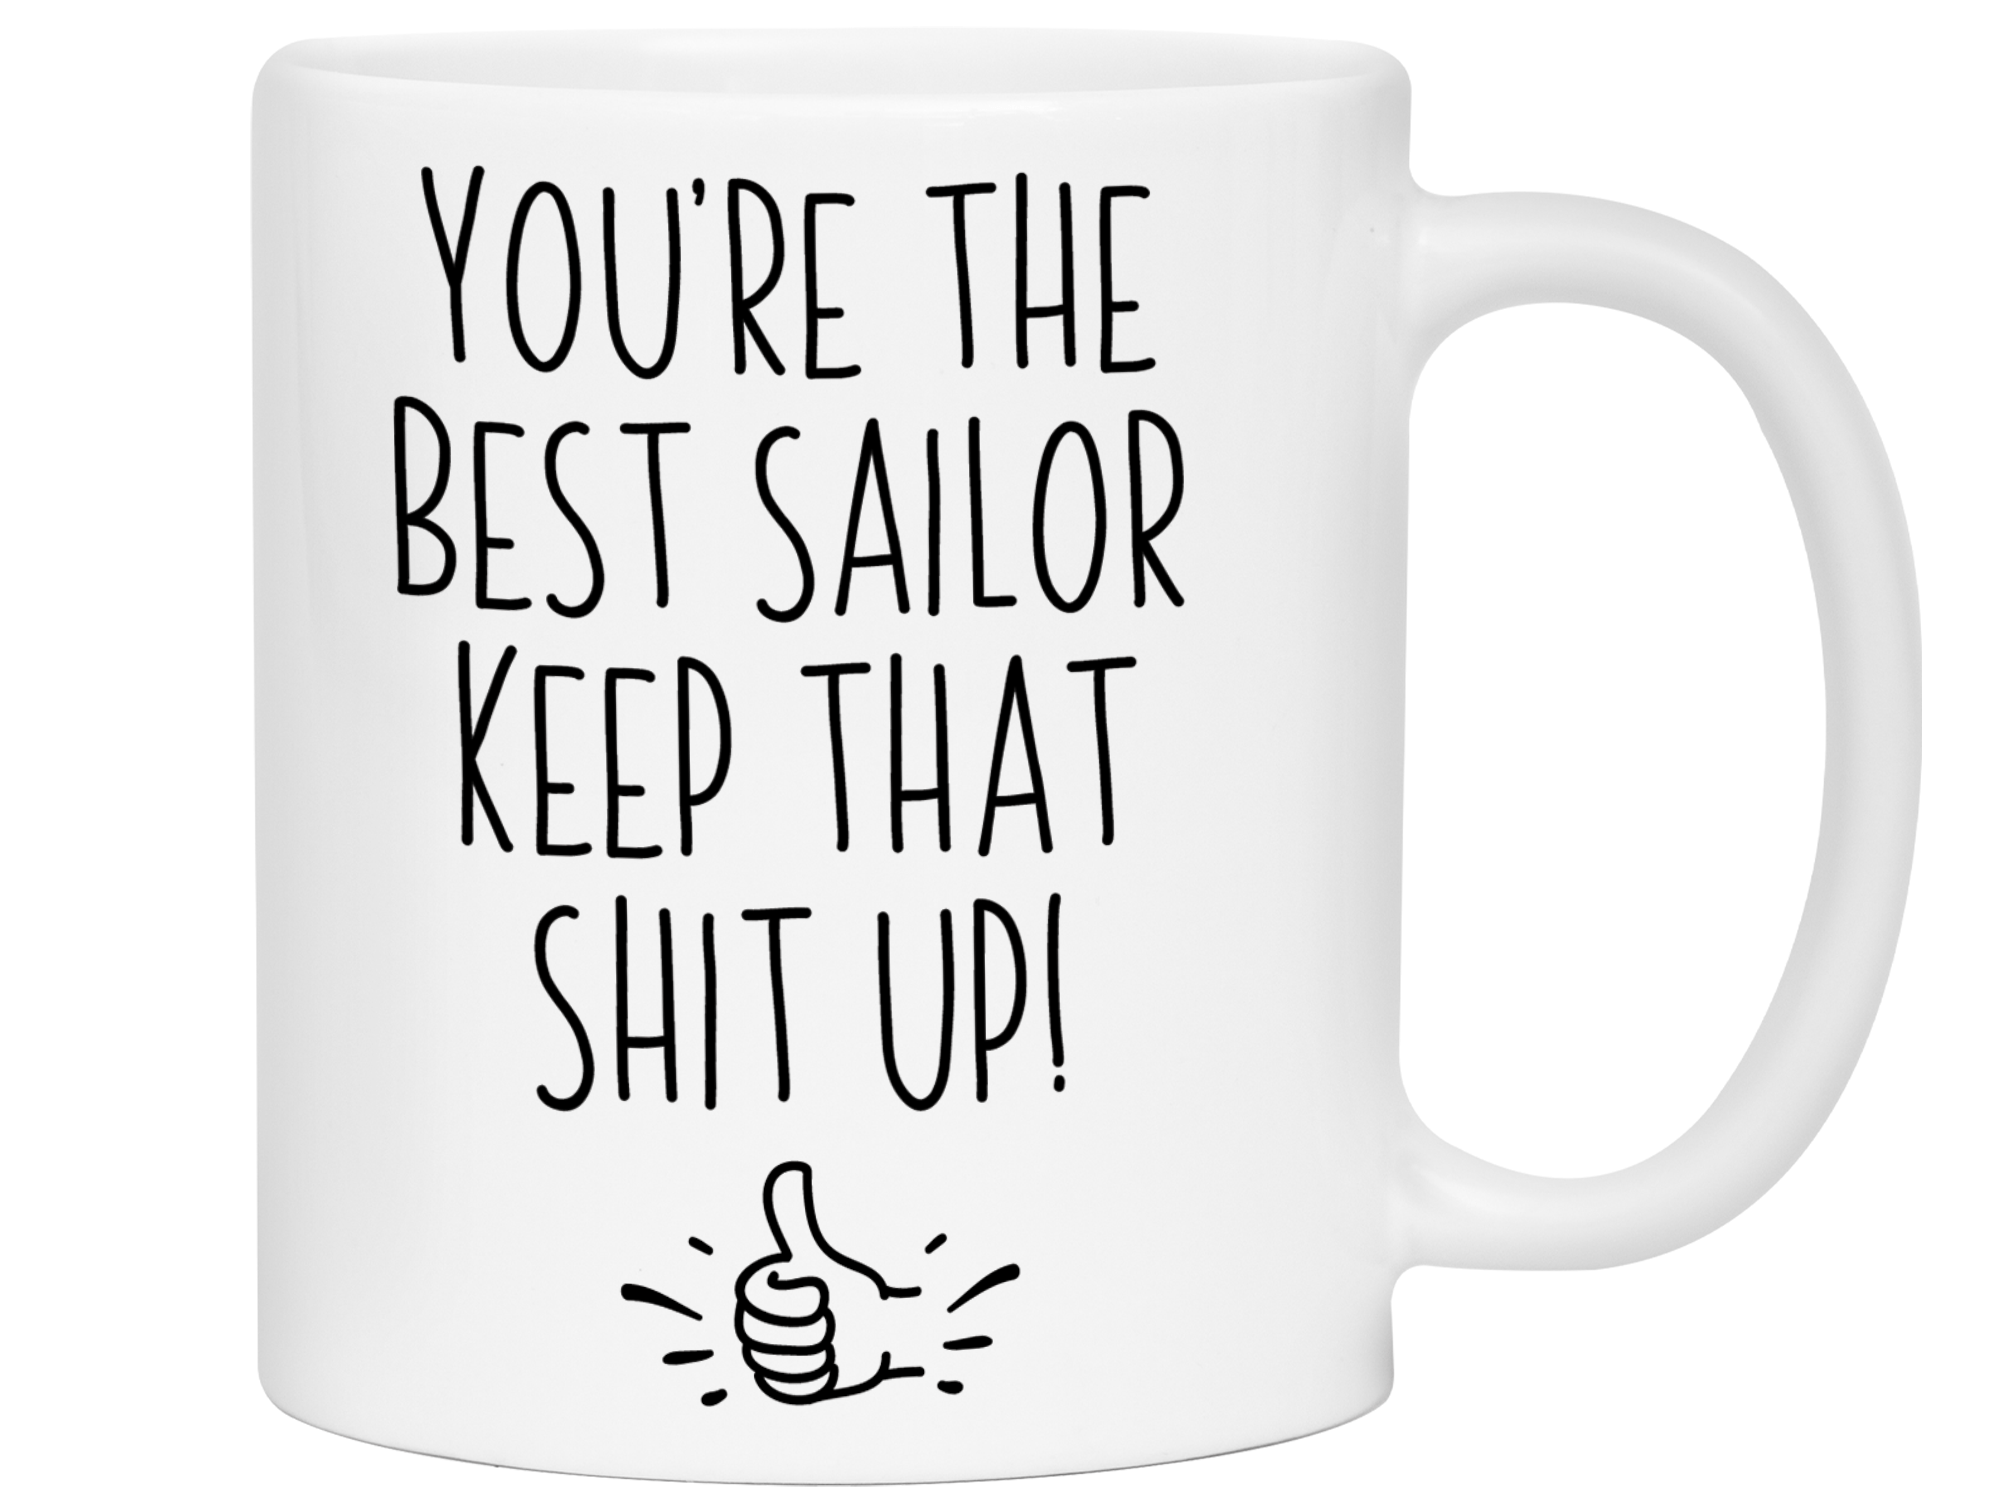 Funny Sailor Gifts - You're the Best Sailor Keep That Shit Up Gag Coffee Mug